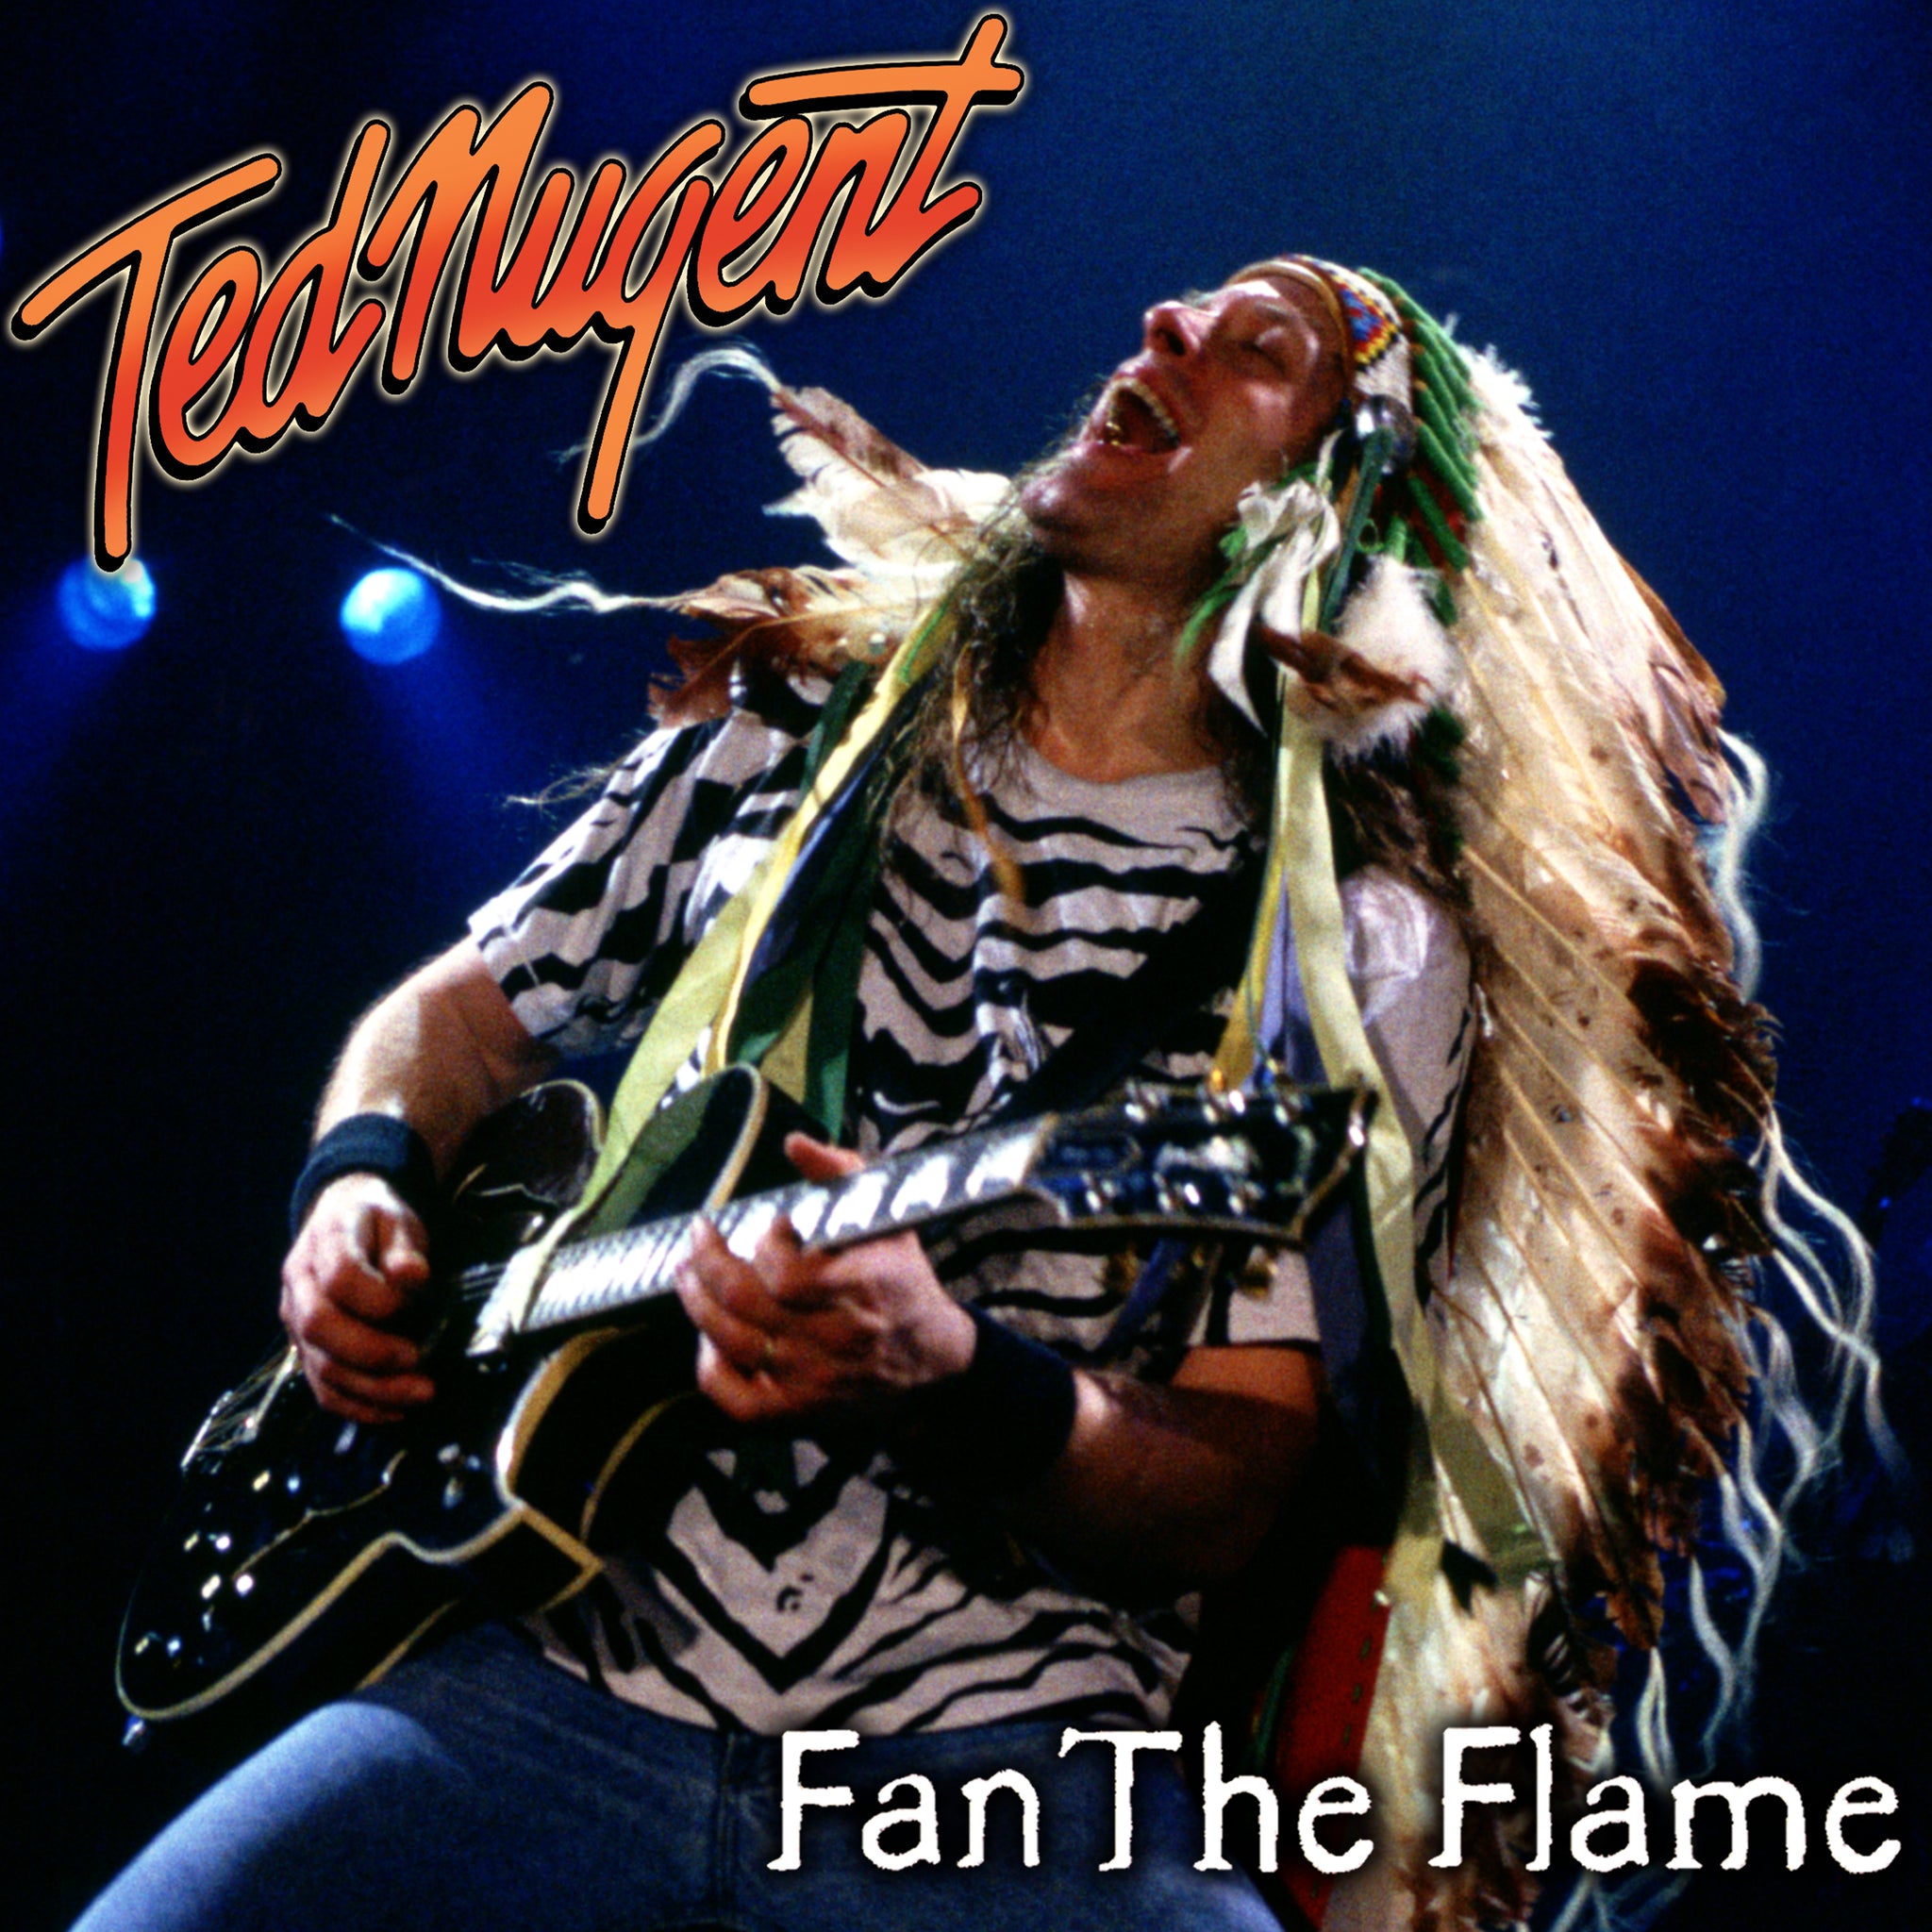 Ted Nugent - Fan The Flame EP ~ Digital Download